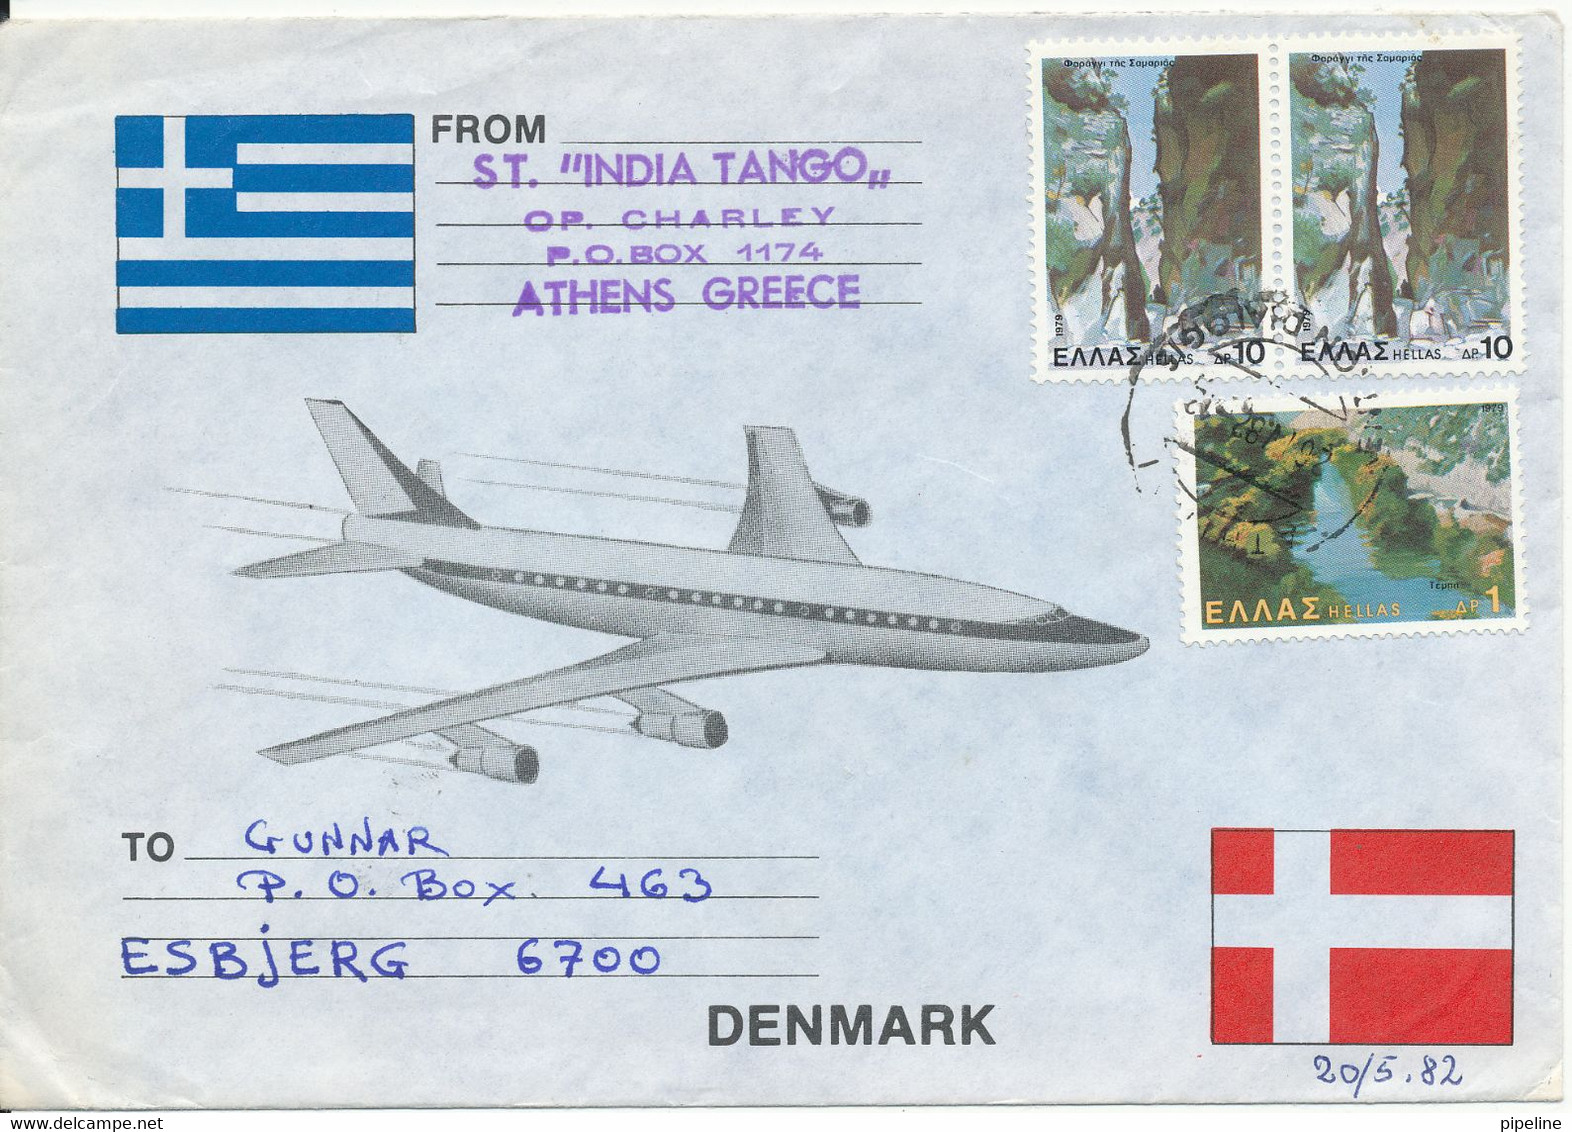 Greece Special Air Mail Cover Sent To Denmark 26-4-1982 - Covers & Documents